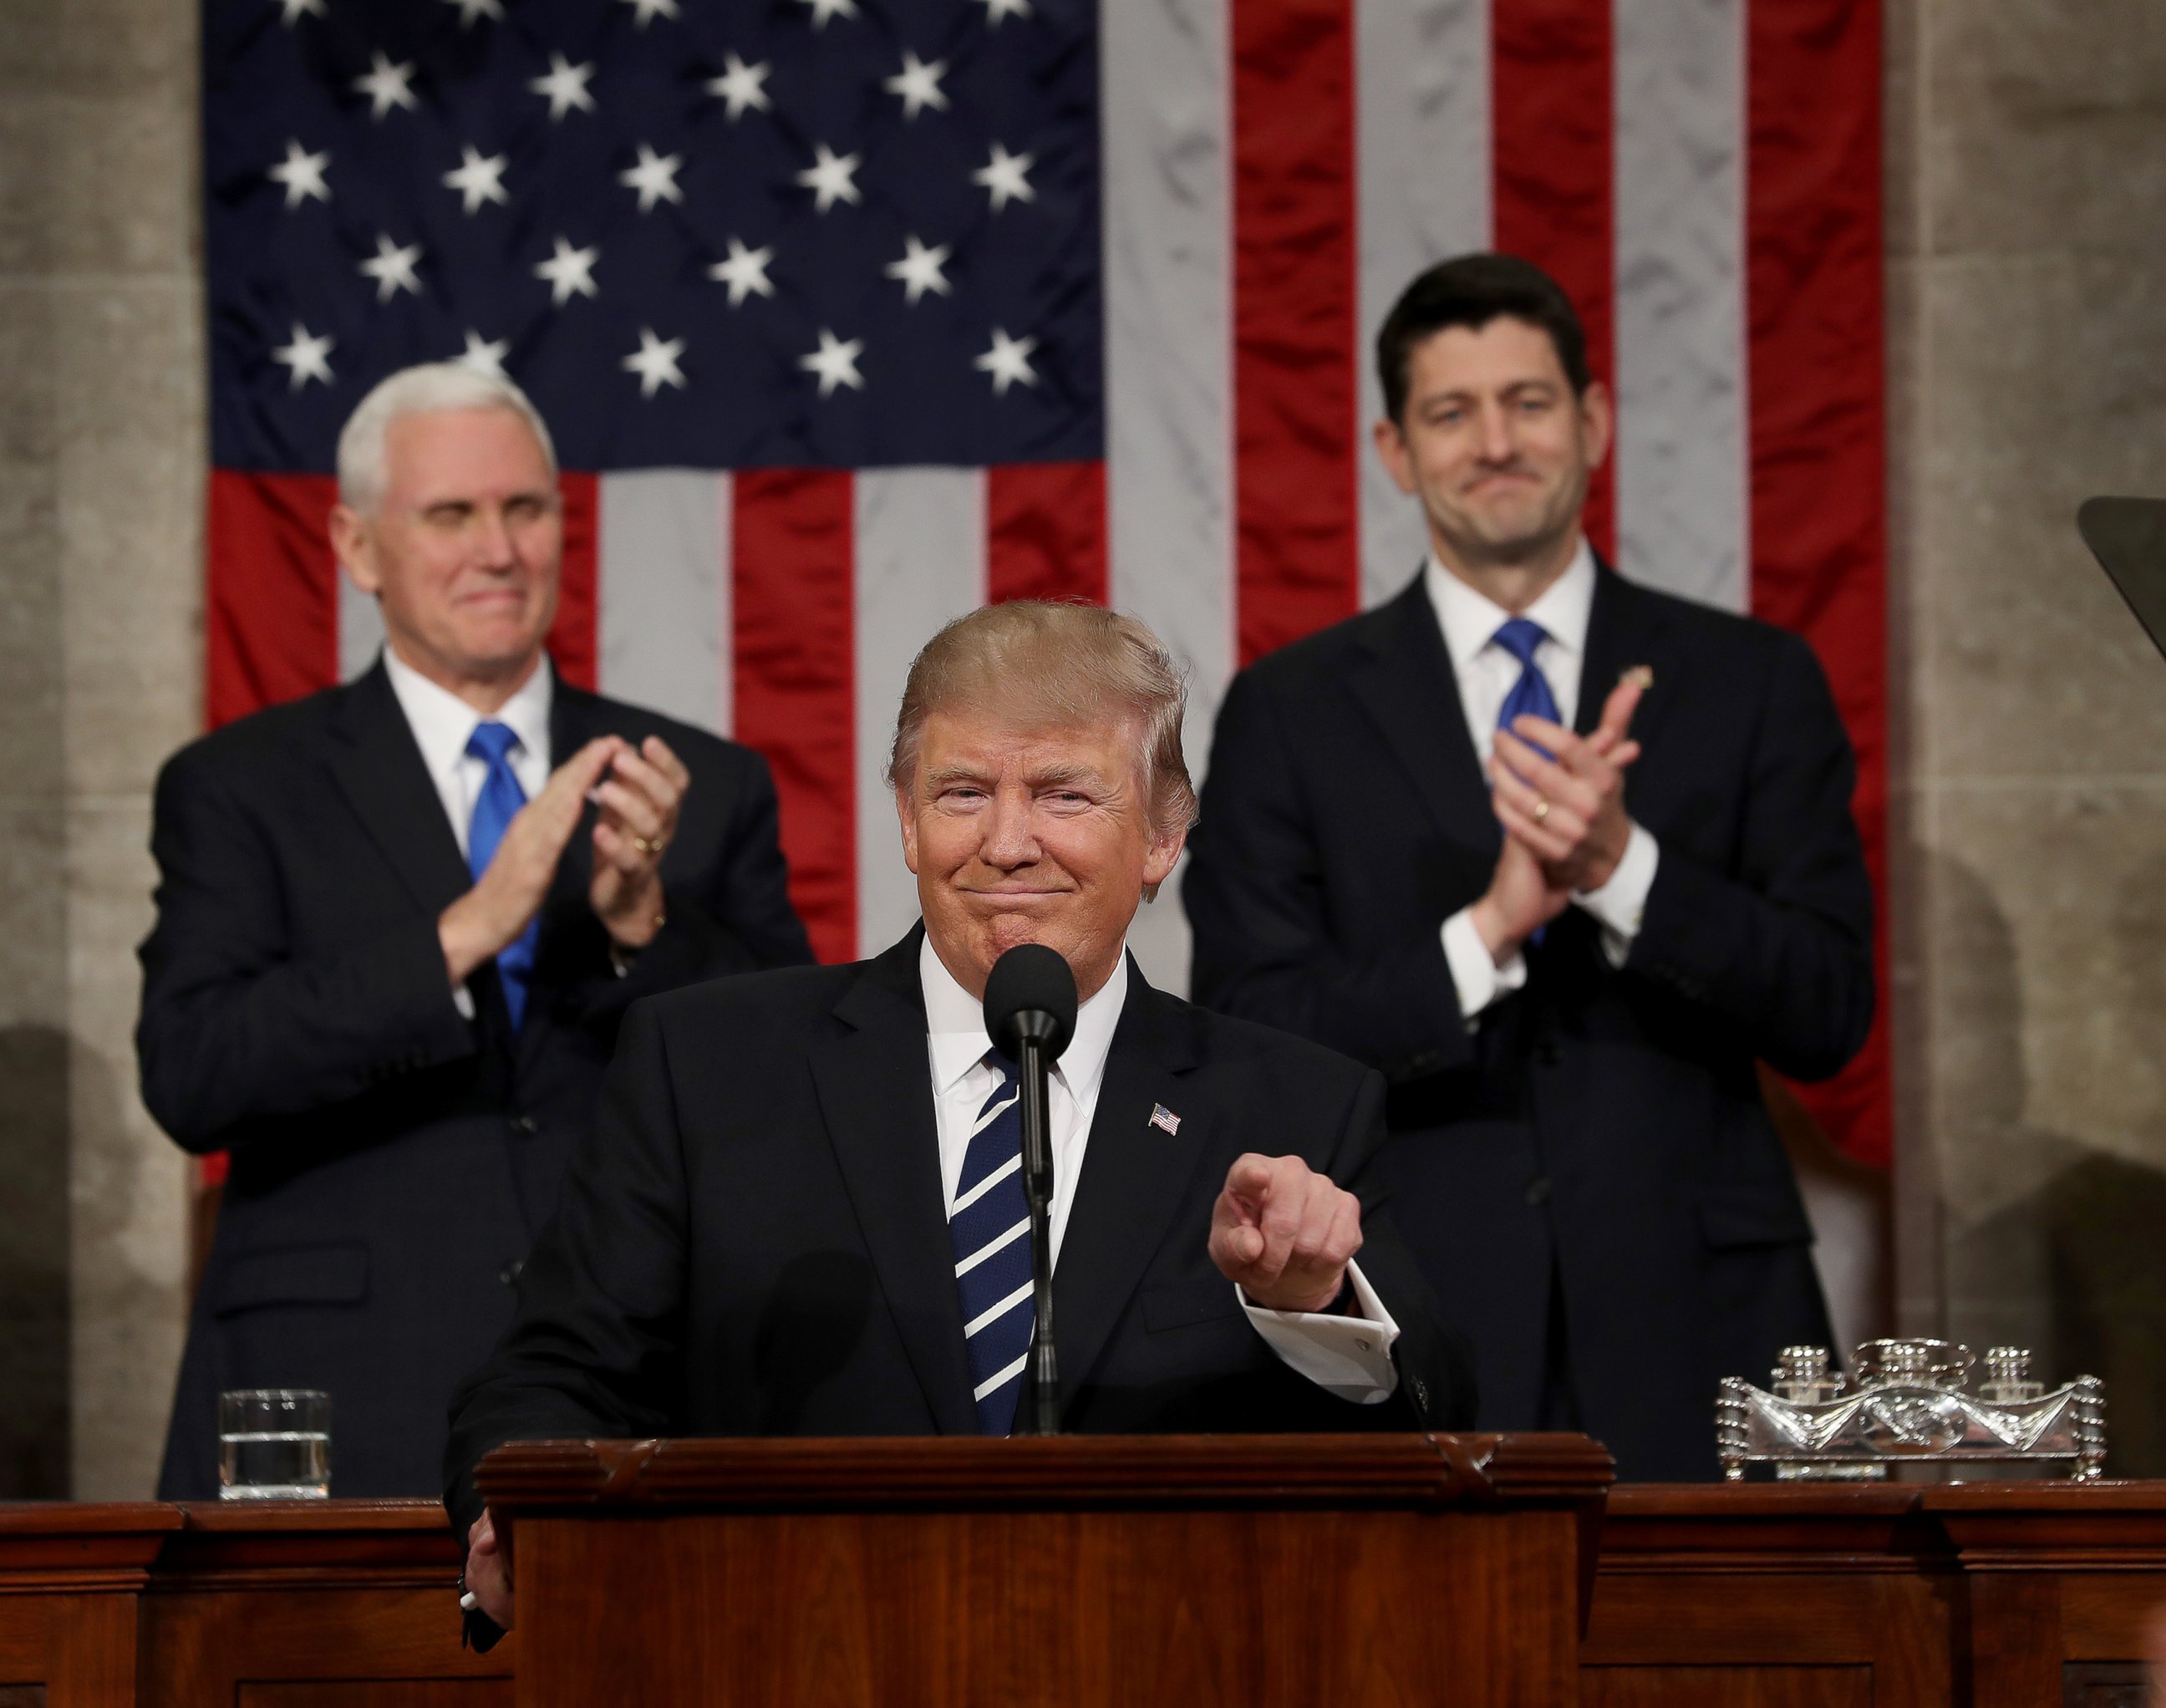 PHOTO: Vice President Mike Pence and Speaker of the House Paul Ryan applaud as President Donald  Trump delivers his first address to a joint session of Congress, Feb. 28, 2017, in Washington.